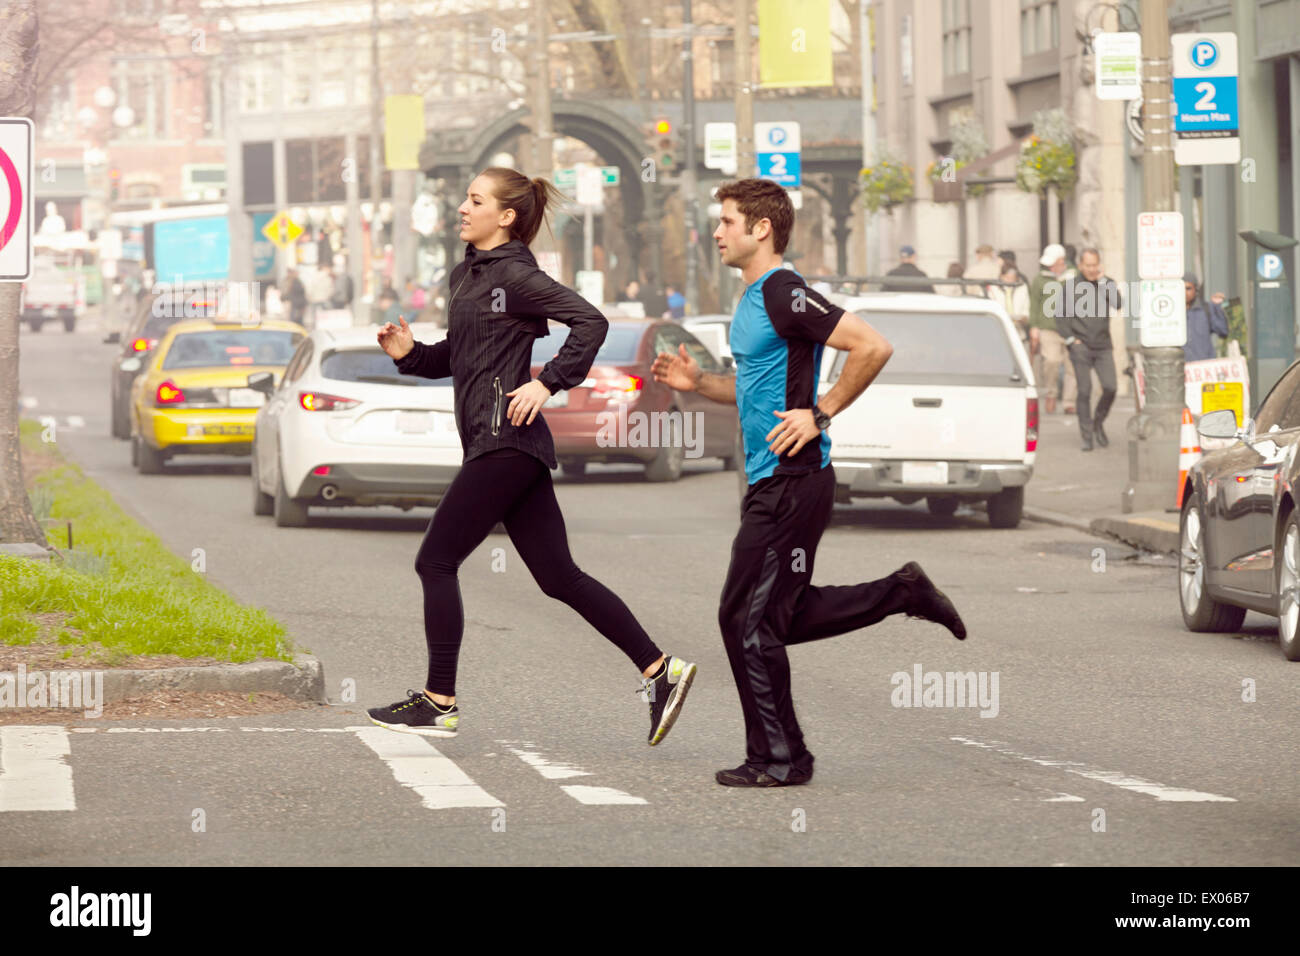 Young man and woman running across city road Stock Photo